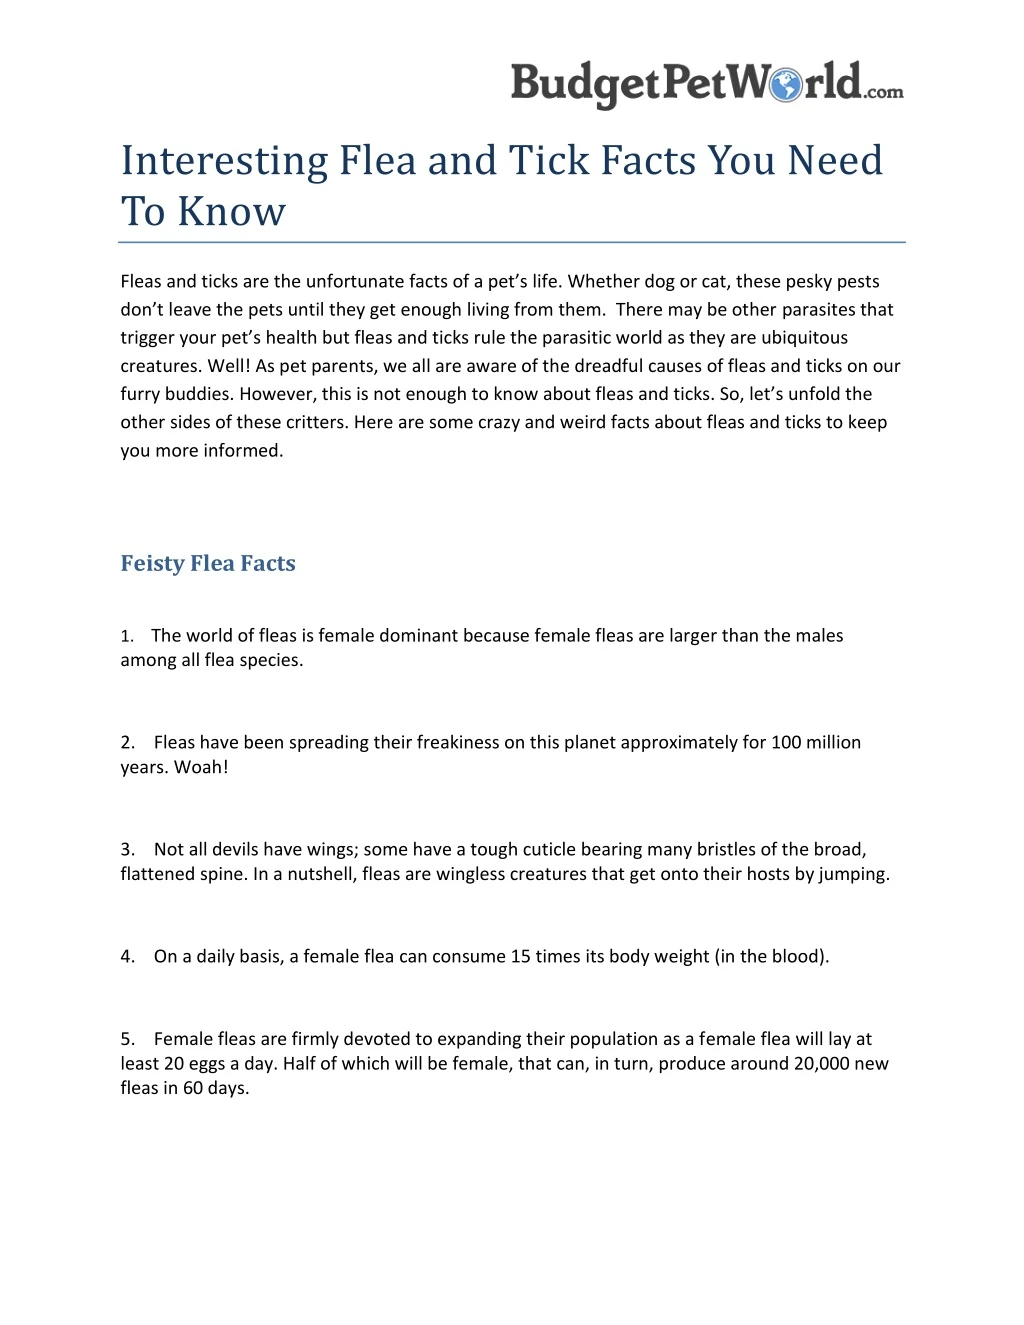 interesting flea and tick facts you need to know